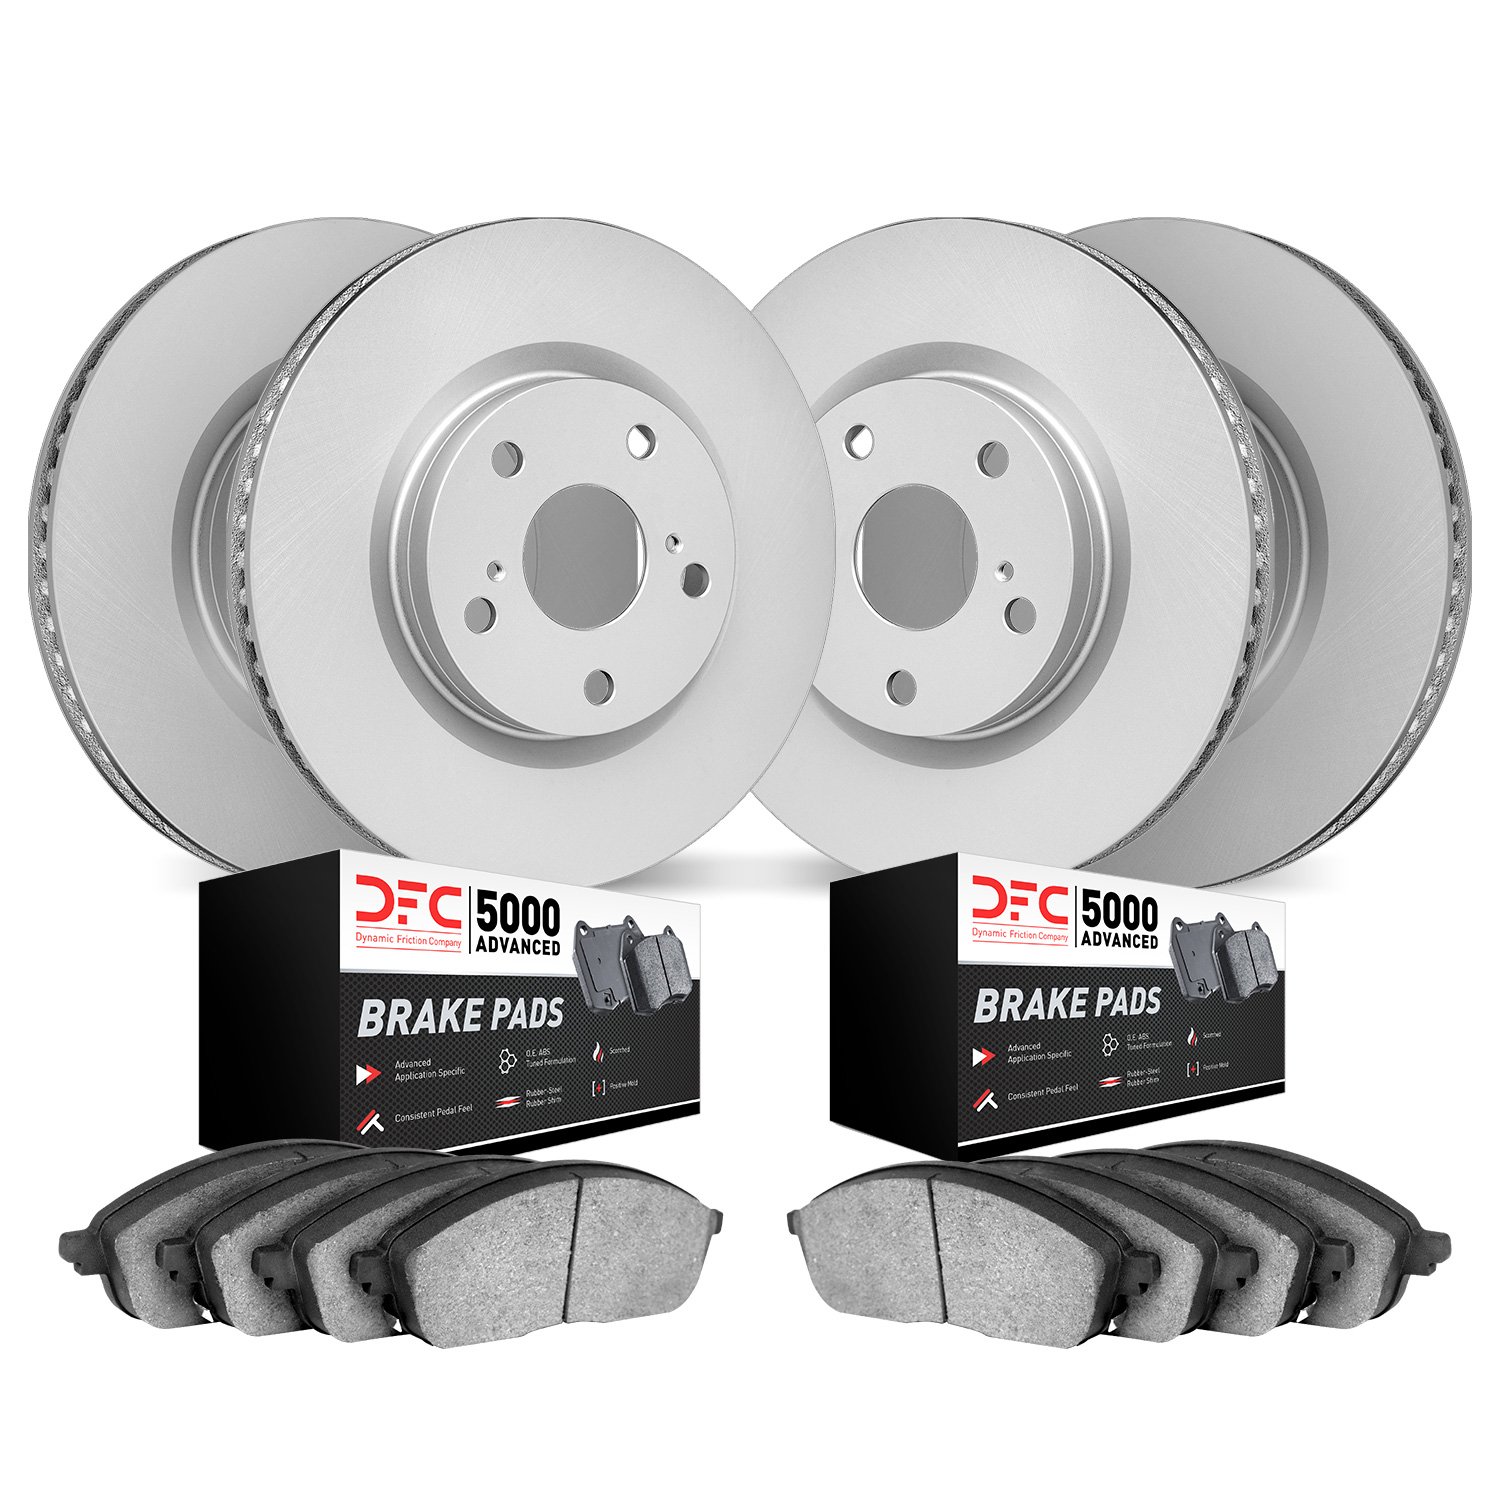 4504-11011 Geospec Brake Rotors w/5000 Advanced Brake Pads Kit, 2013-2017 Land Rover, Position: Front and Rear